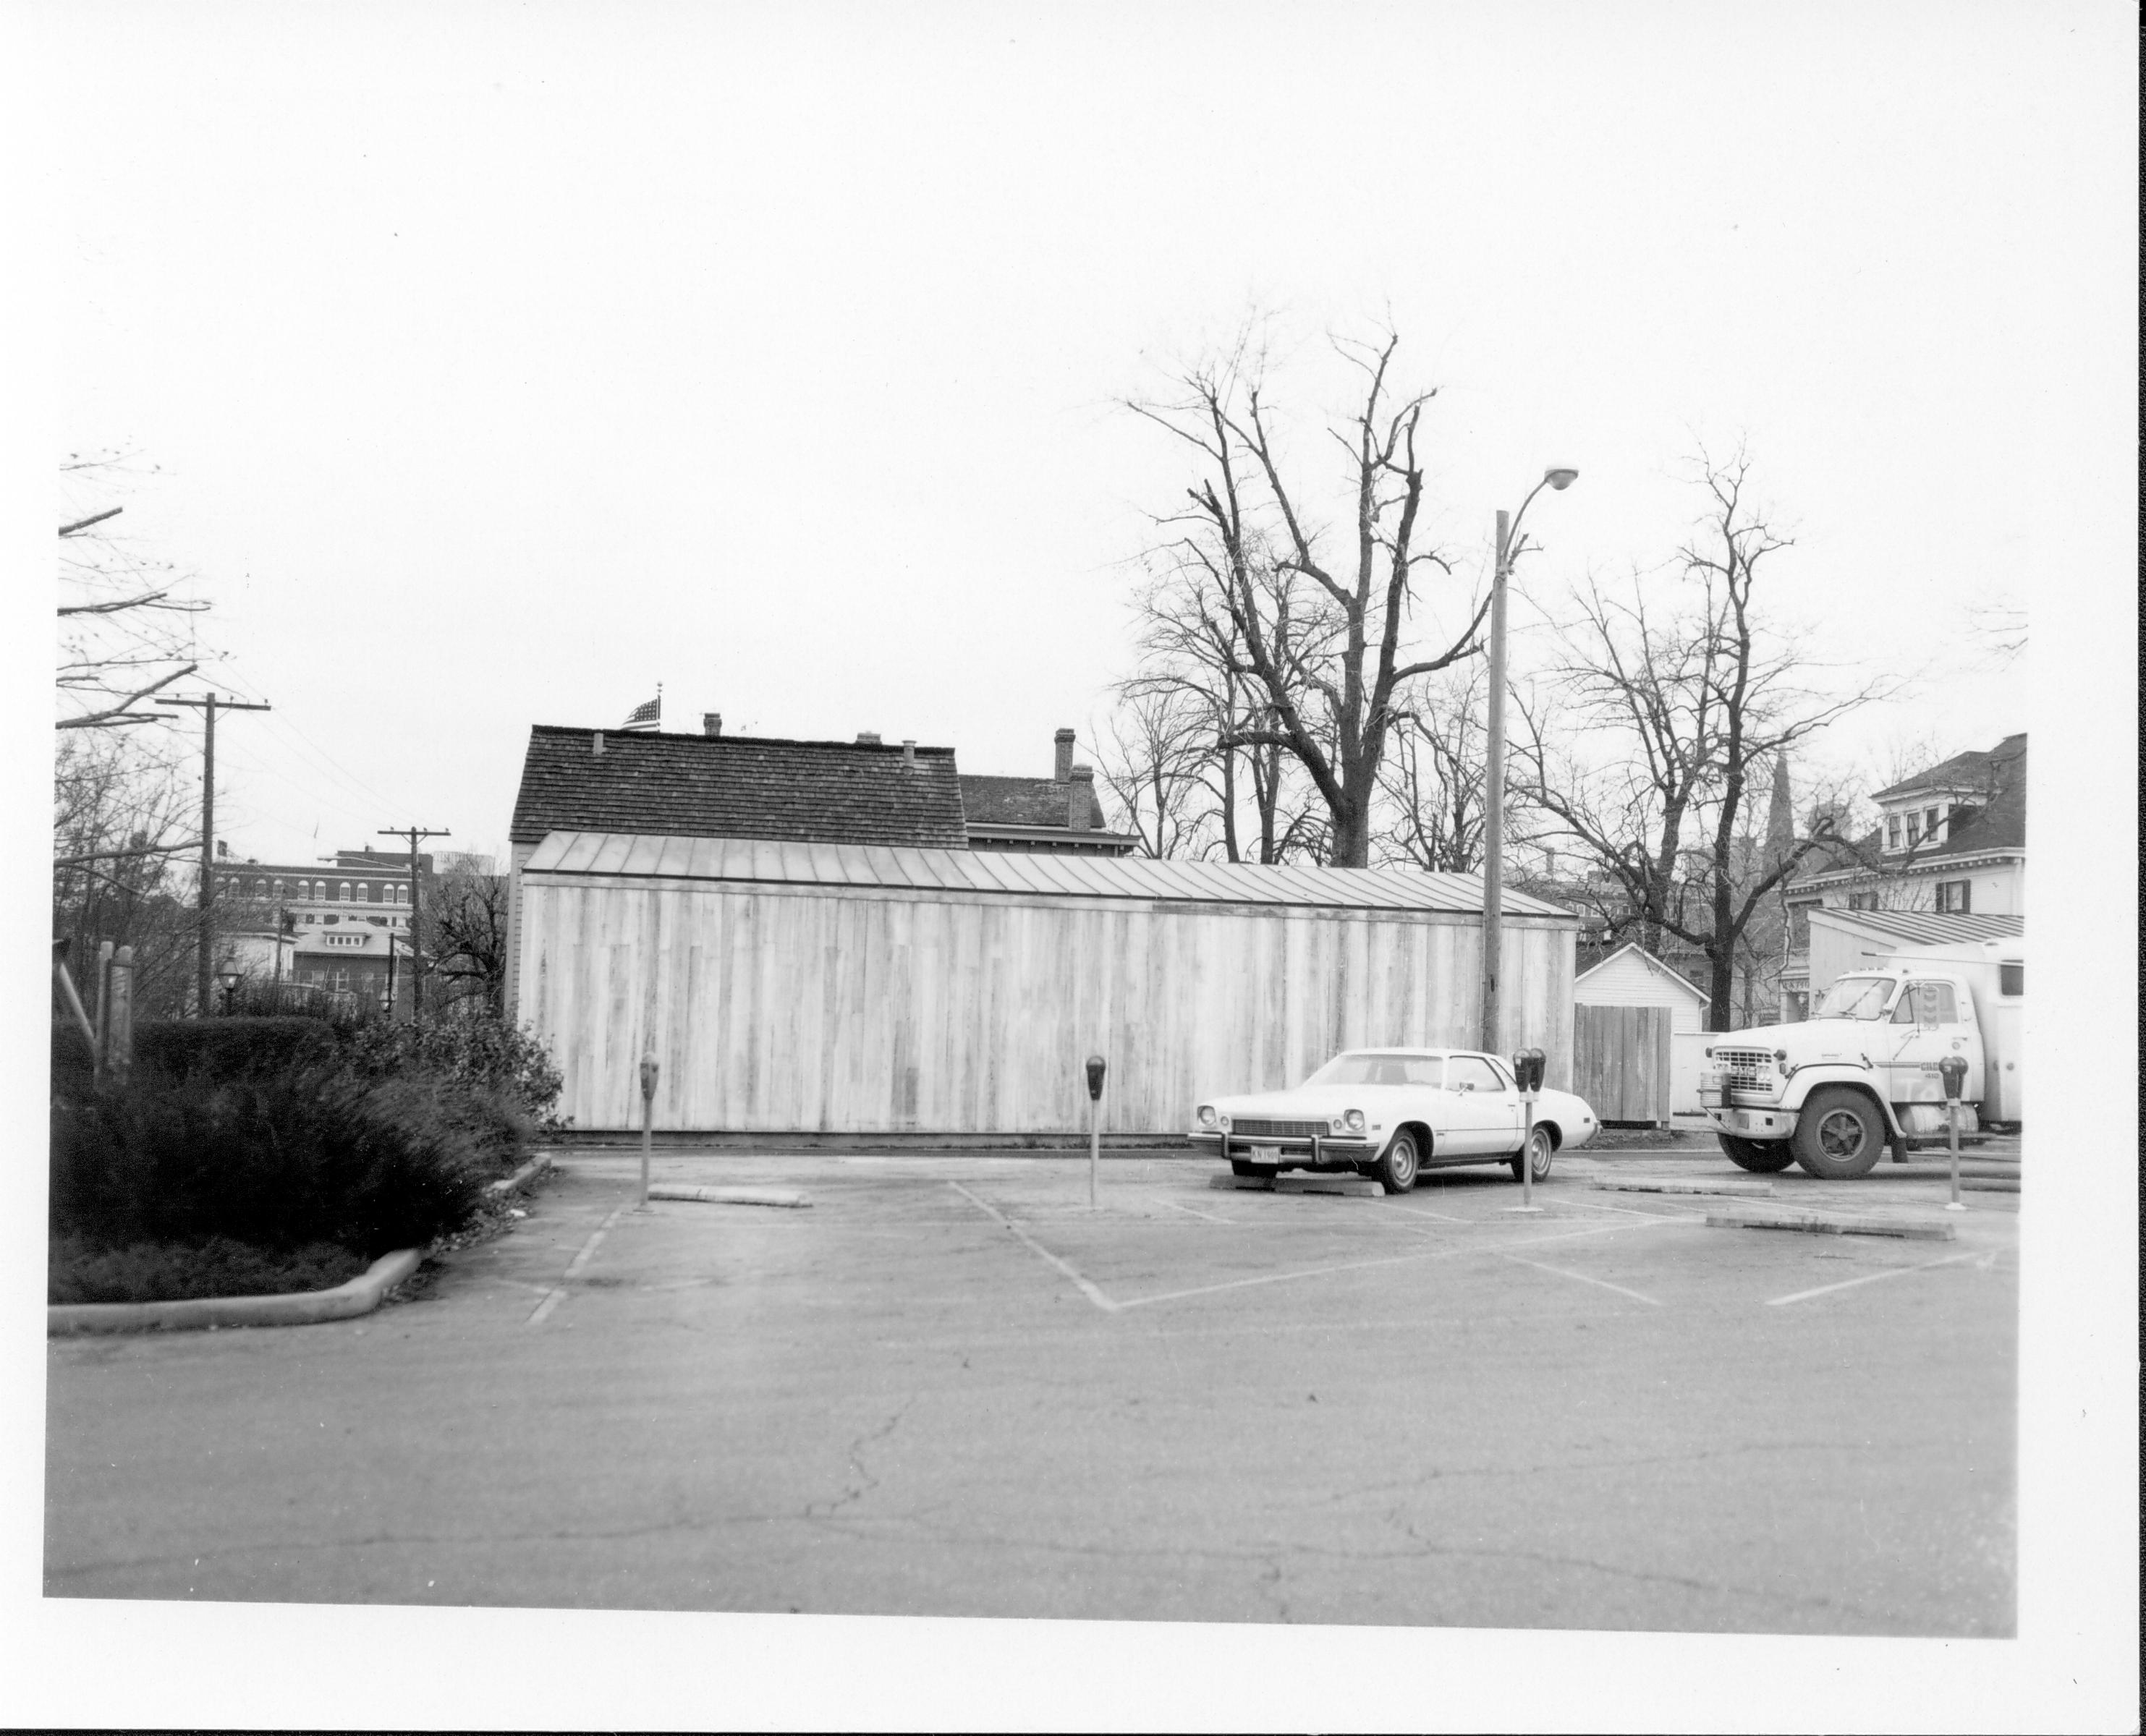 Lincoln Home woodshed. Roof of Lincoln Home in background, with visitor parking lot in foreground. Photographer facing west.